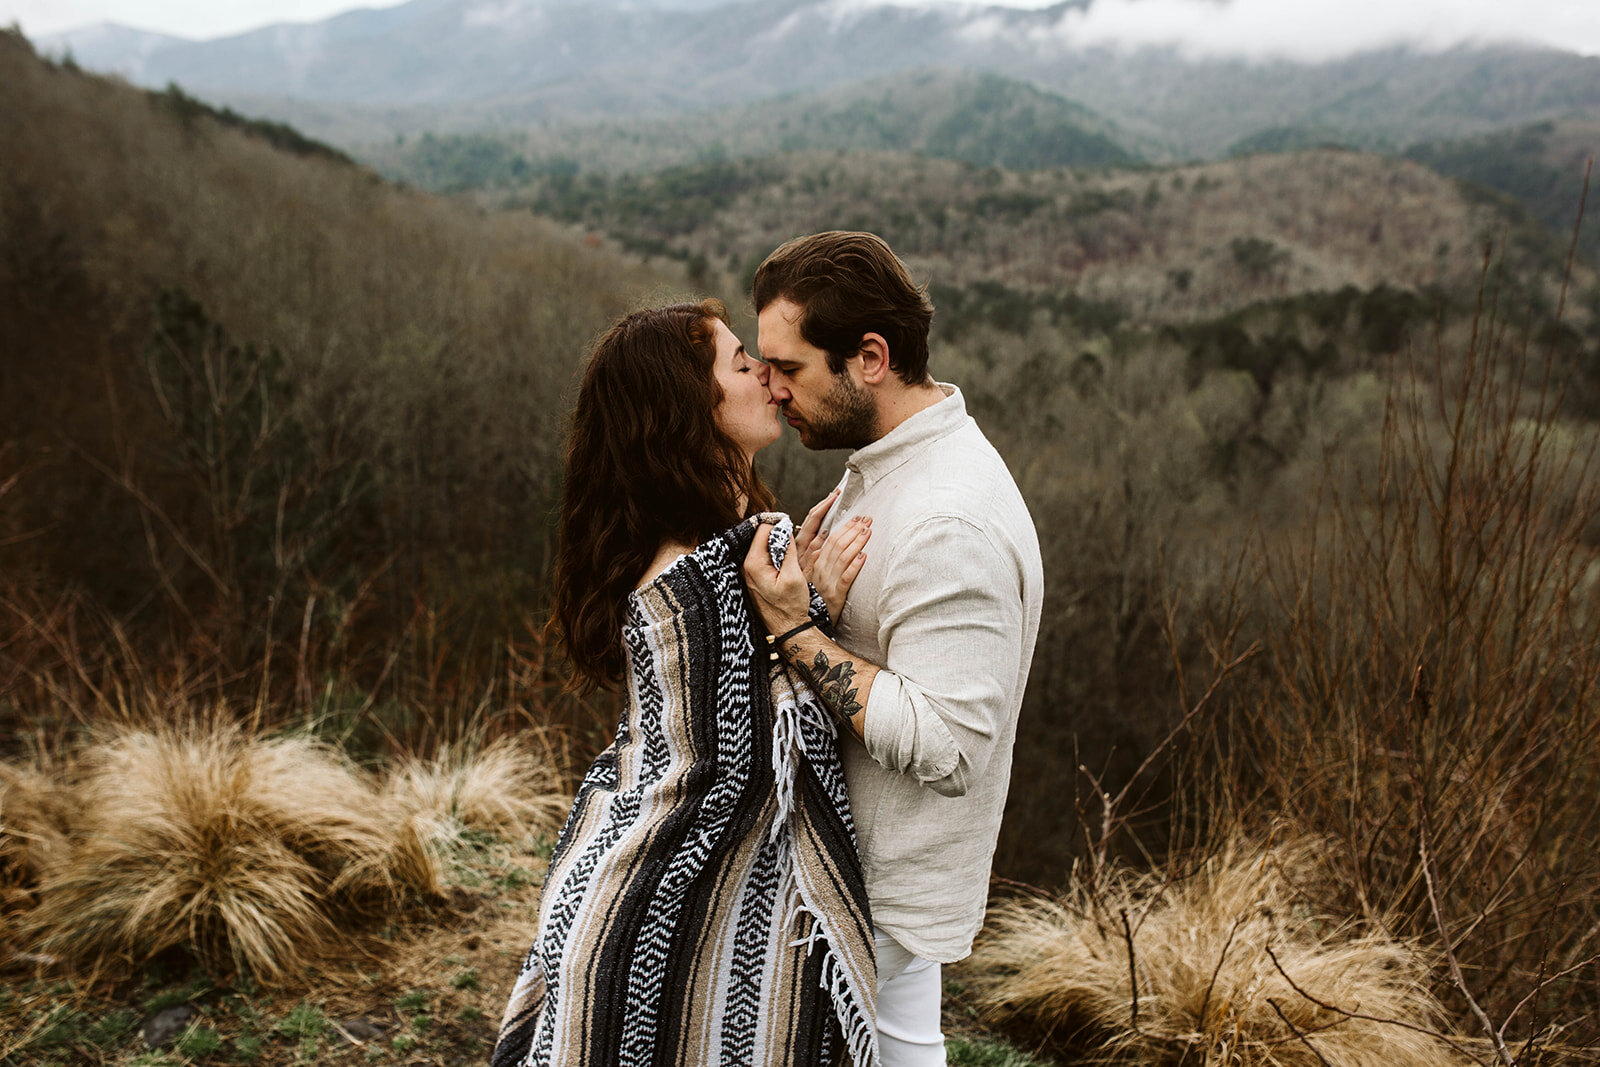 adventure-engagement-in-the-great-smoky-mountains-chattanooga-elopement-photographer5Y6A5800_websize.jpg